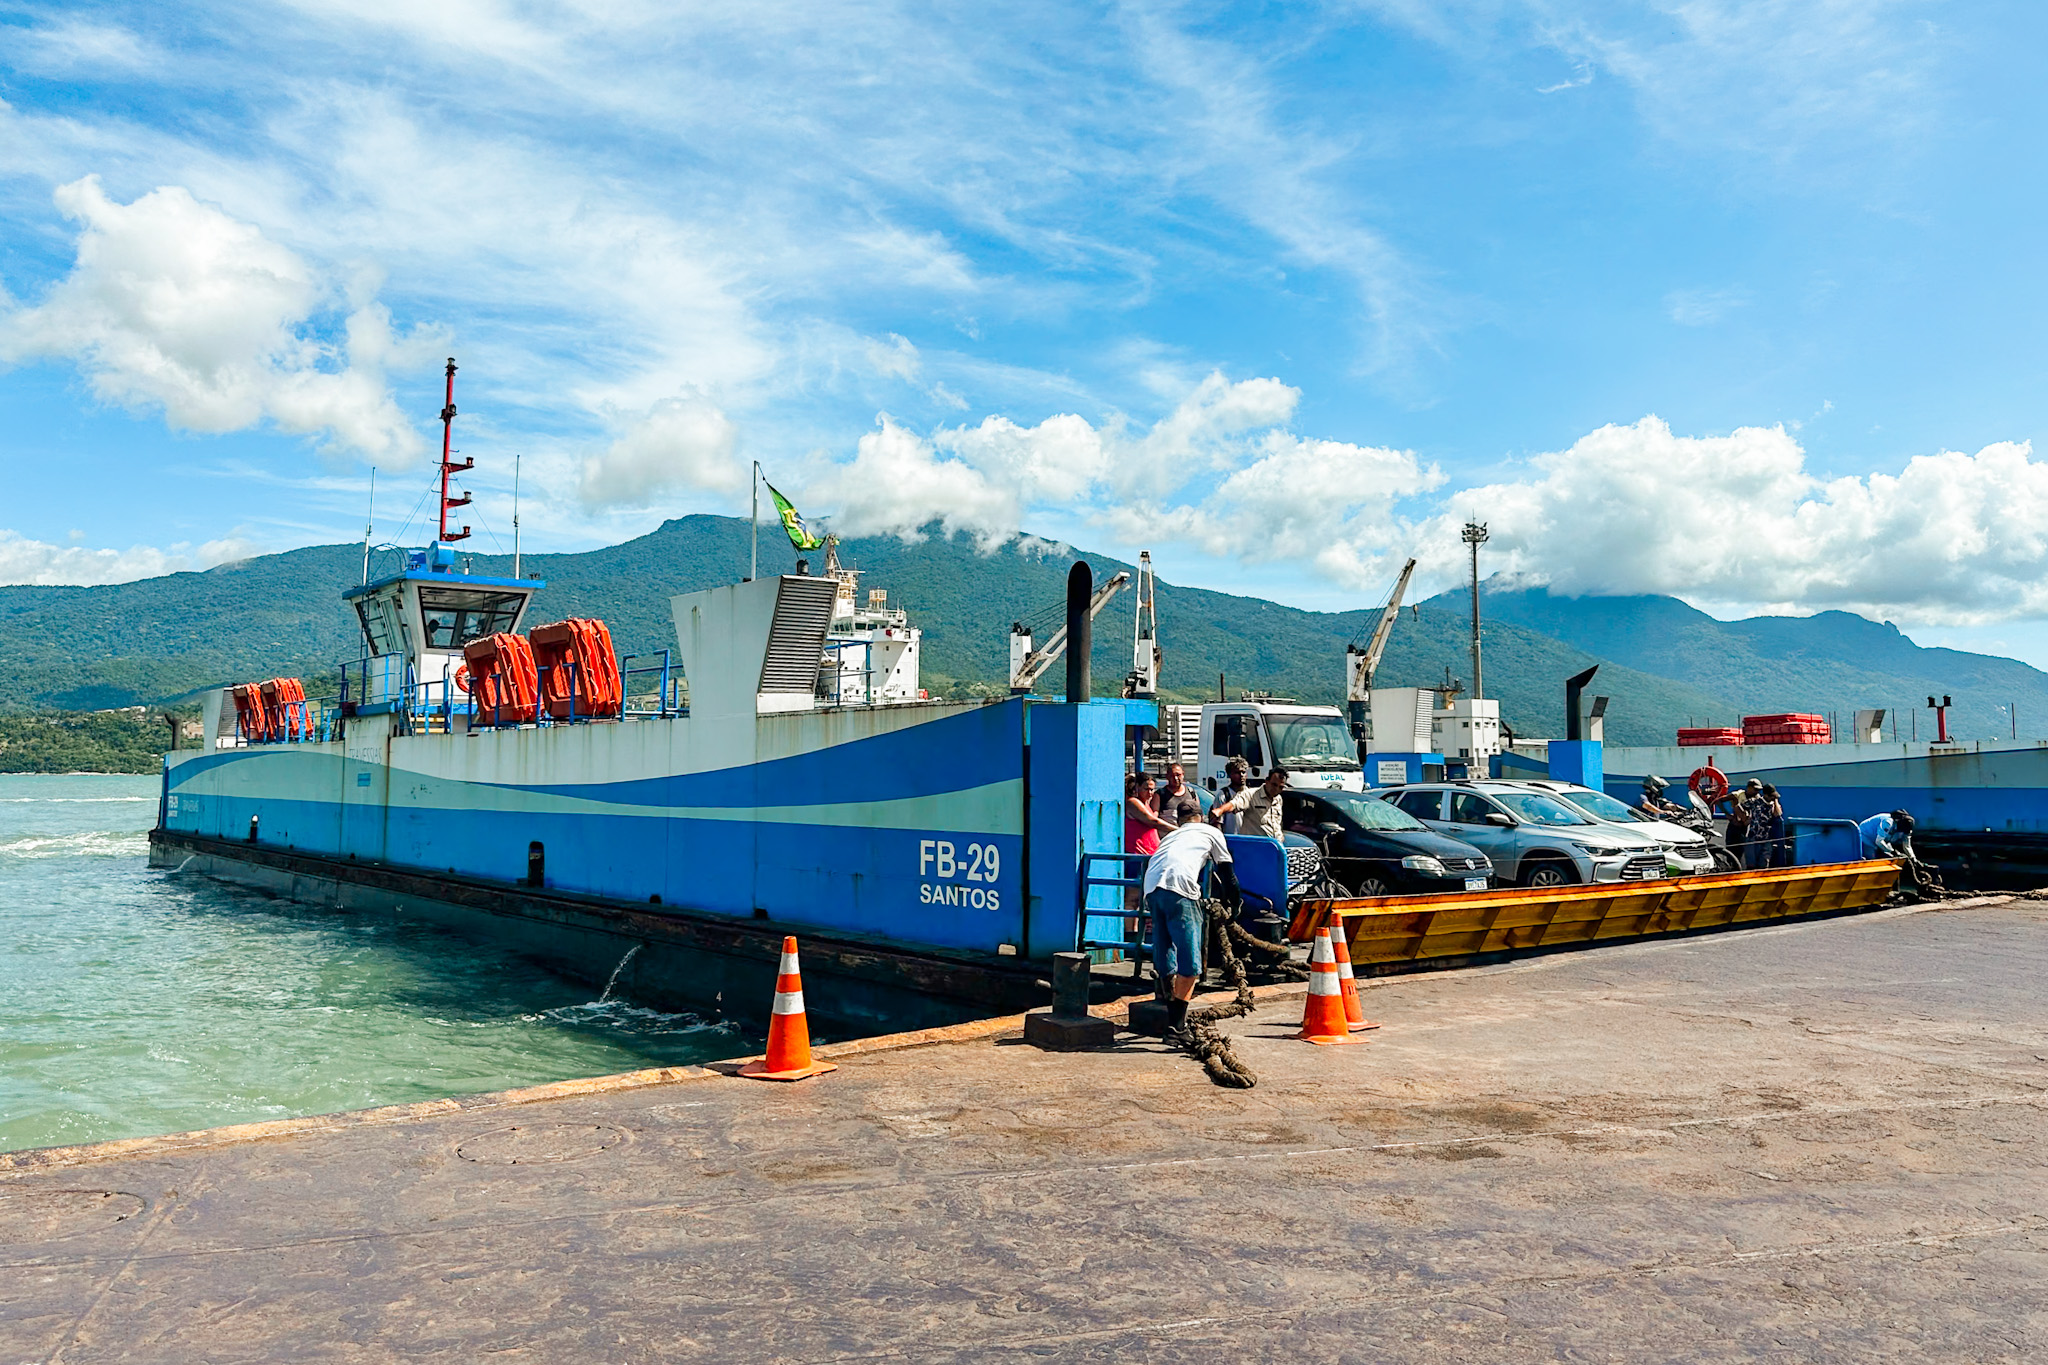 Ilhabela Travel Guide: How to get to Ilhabela with a ferry